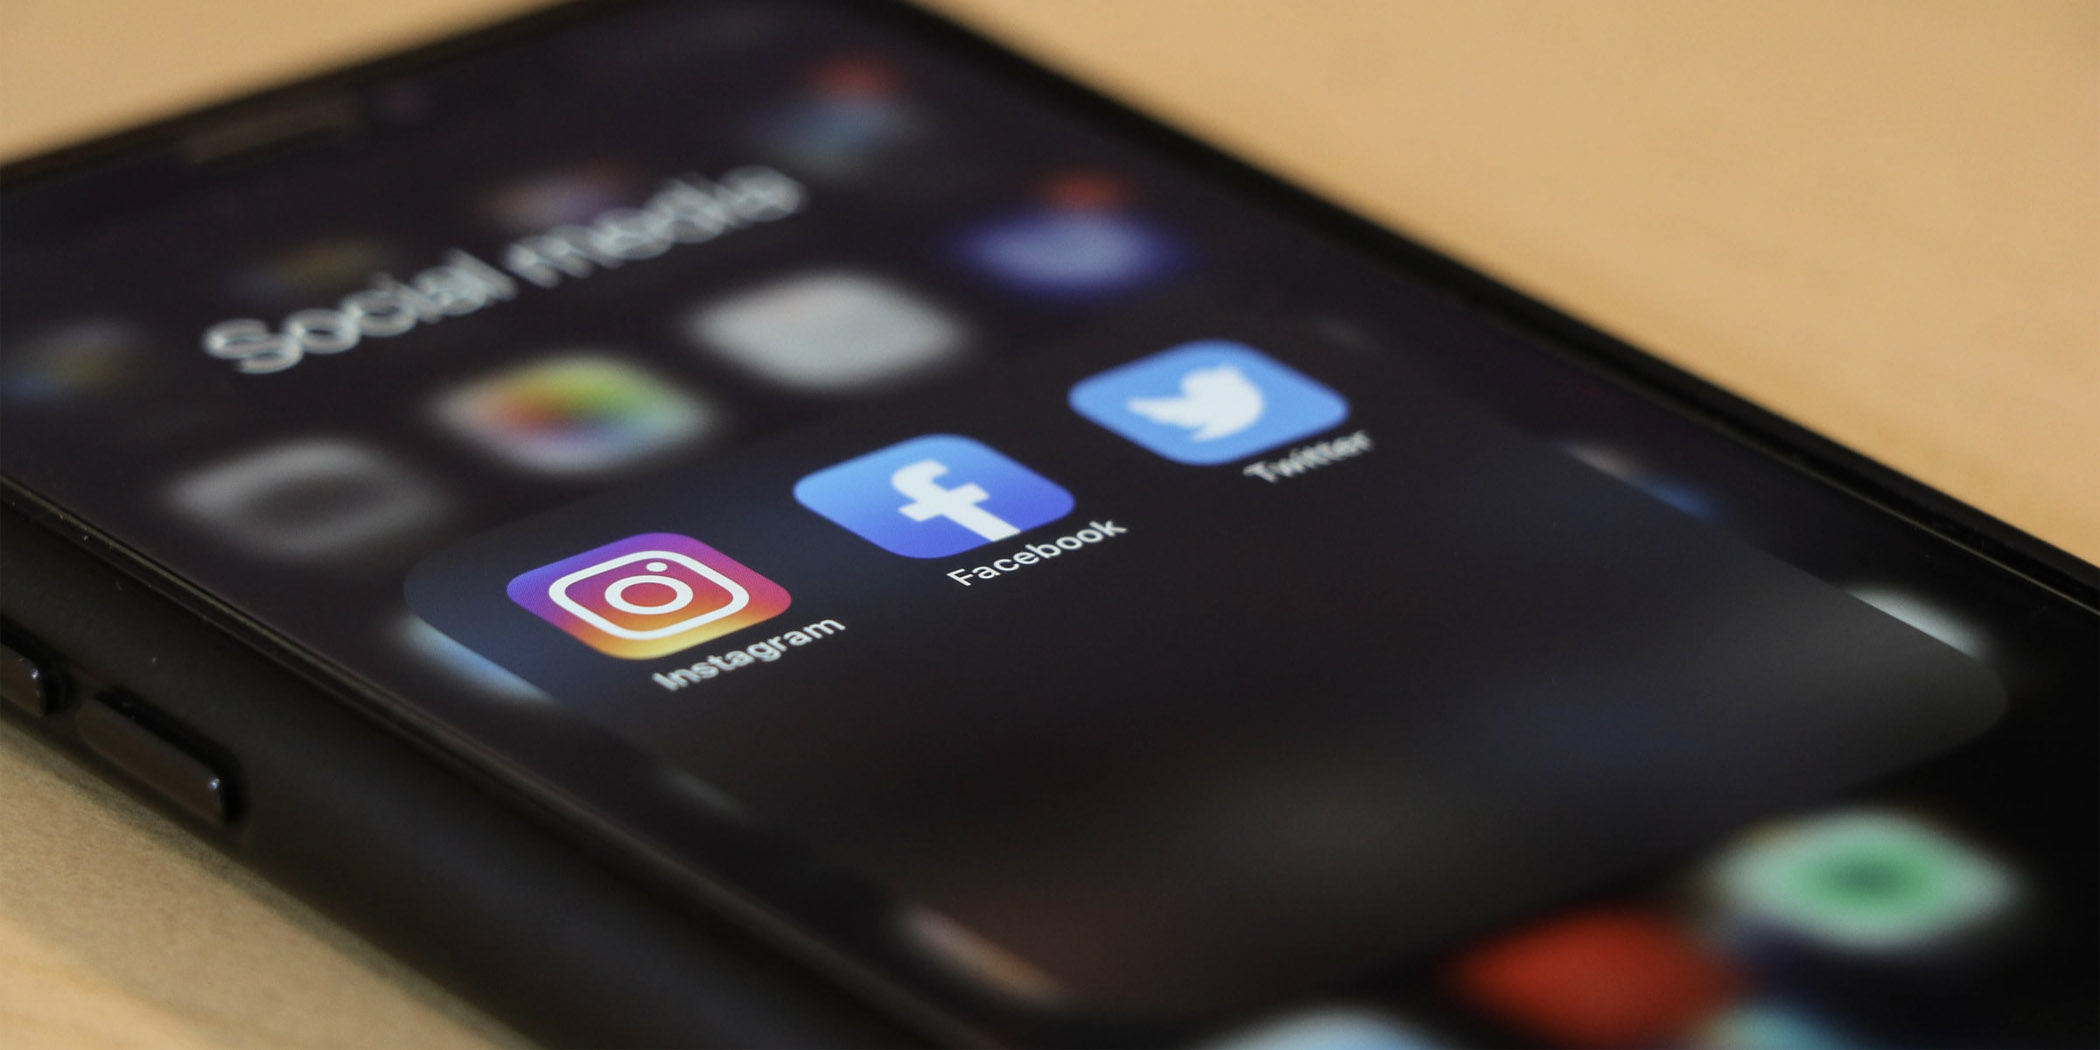 Image of an iPhone showing social media apps Instagram, Facebook, and Twitter